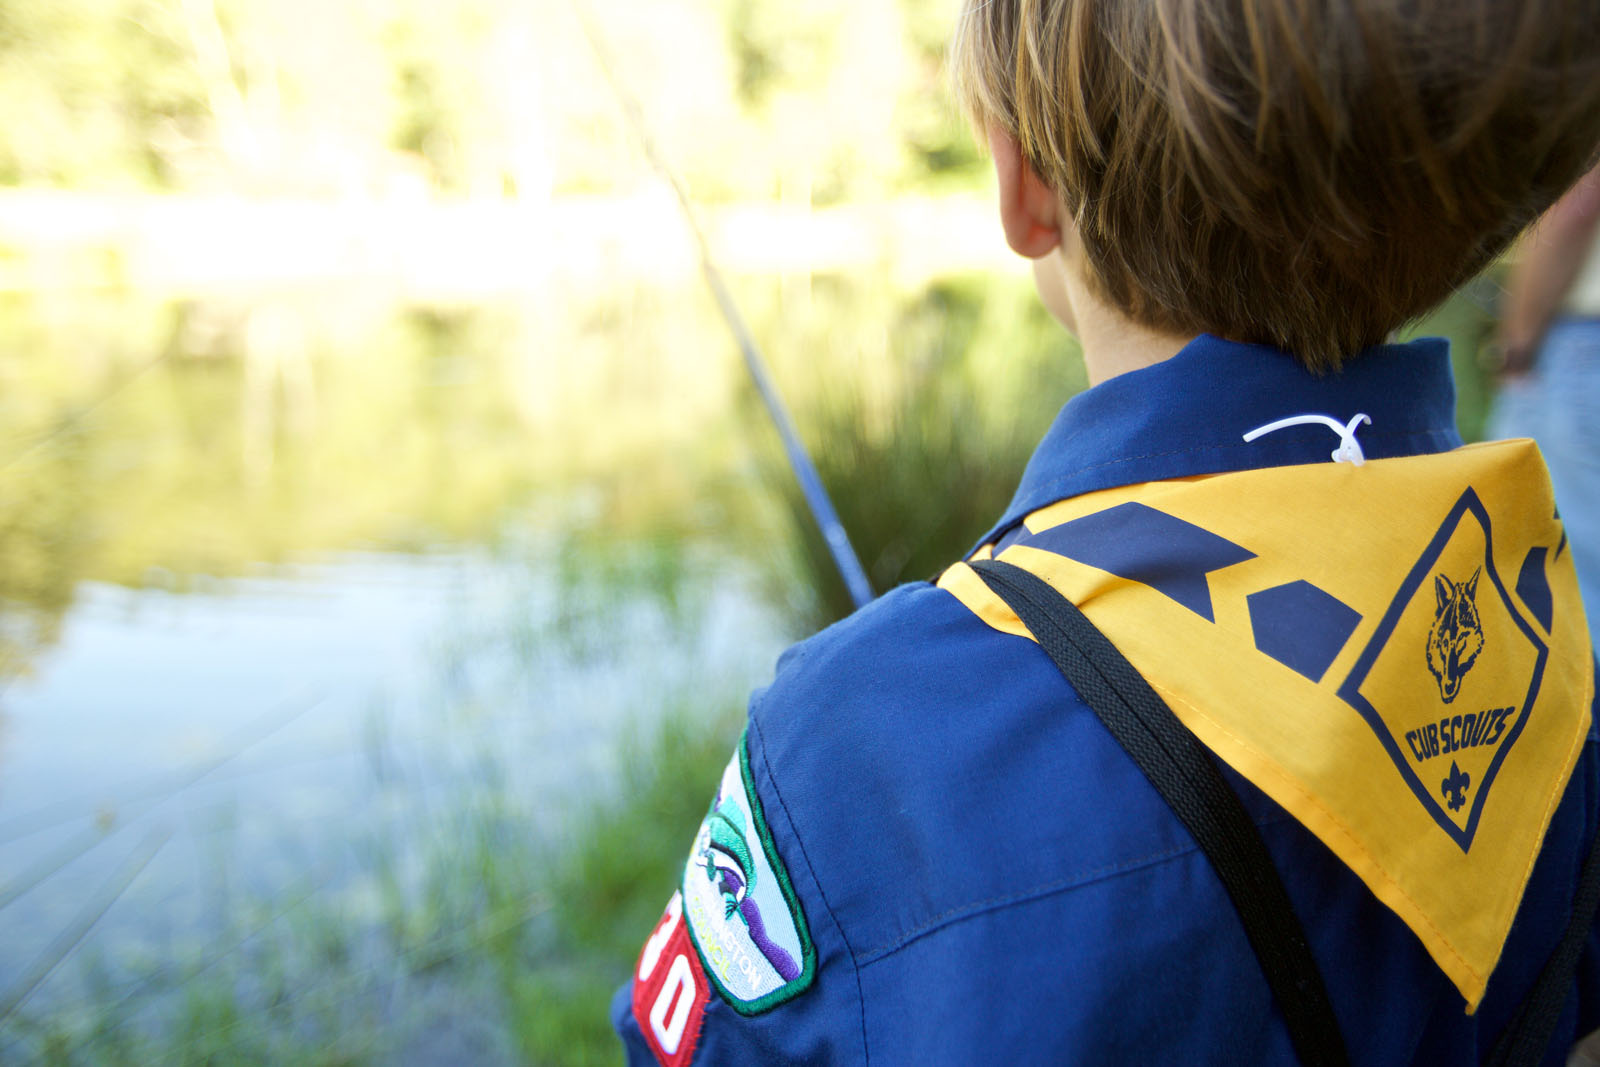 Becoming a Cub Scout Leader